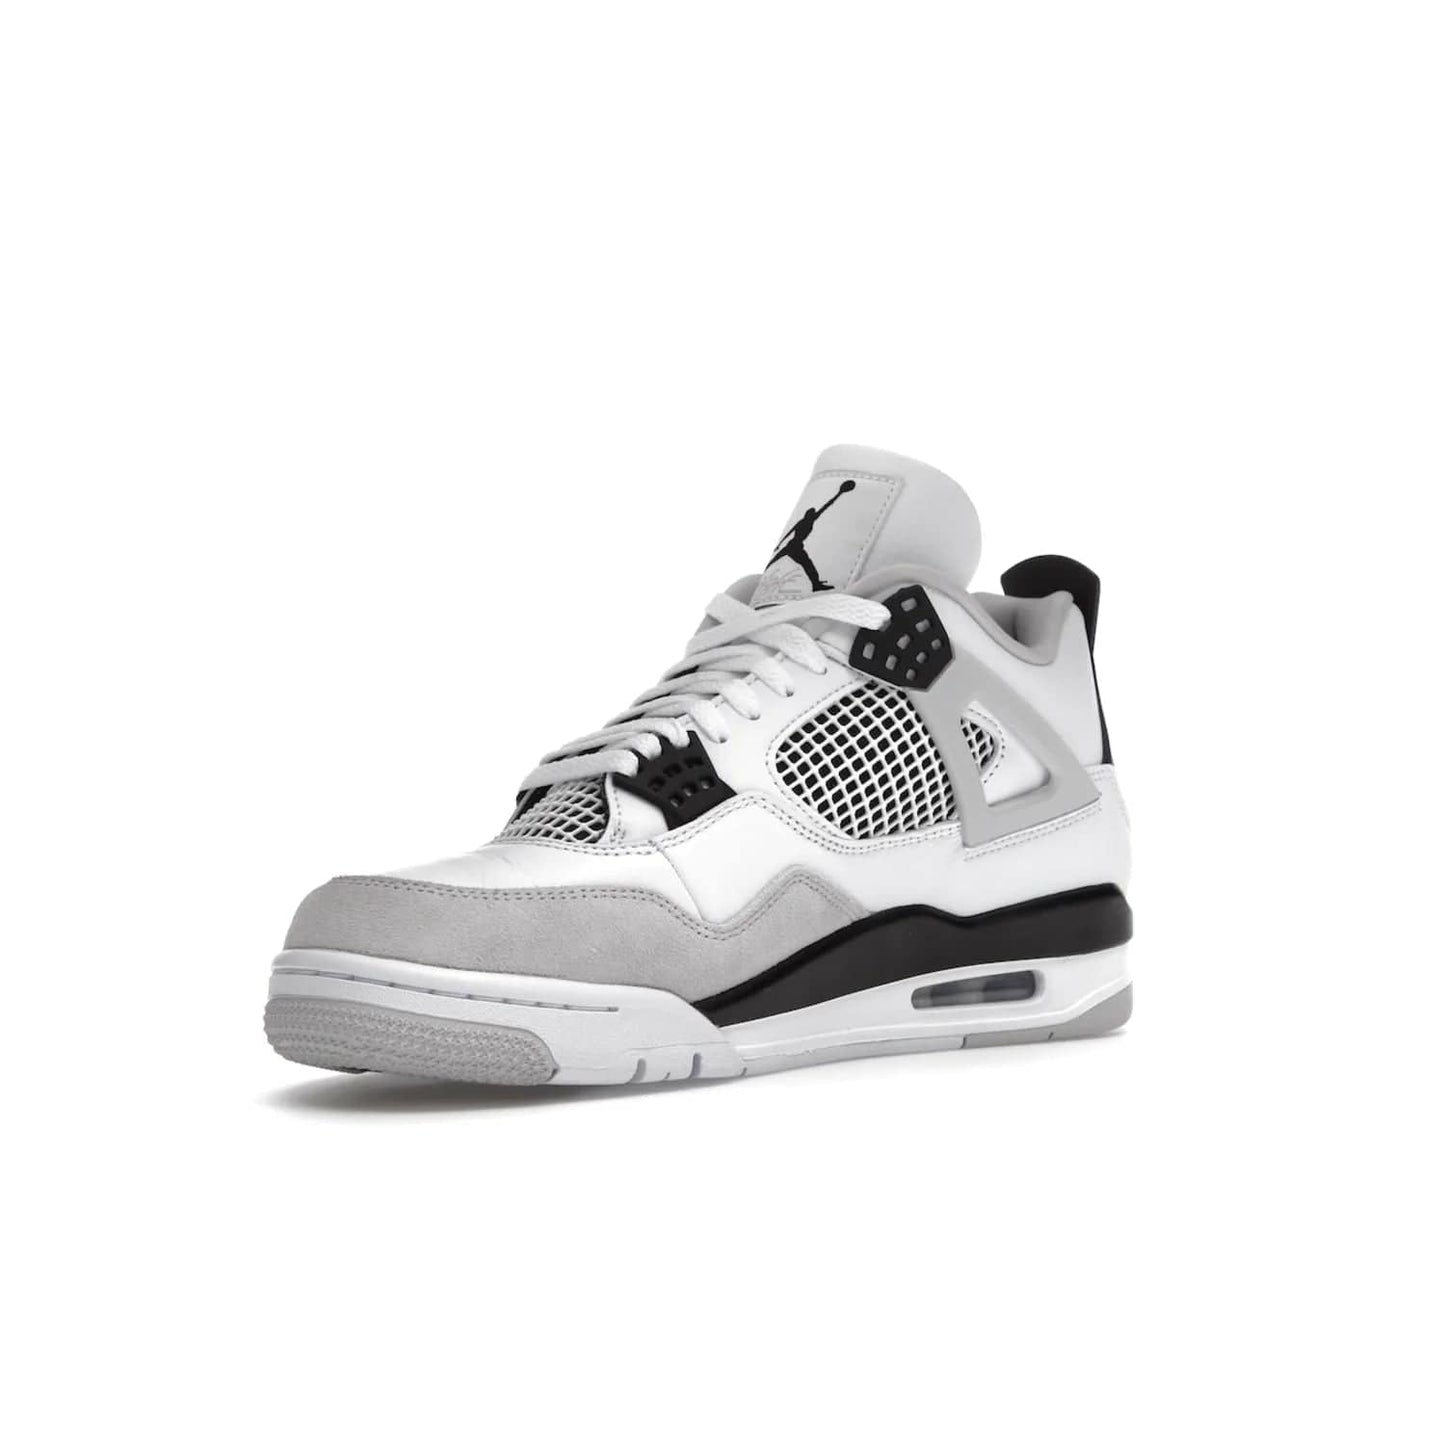 Jordan 4 Retro Military Black - Image 15 - Only at www.BallersClubKickz.com - Updated Air Jordan 4 style with a white/black/light grey sole and visible Air unit. Released in May 2022, offering timeless classic style and comfort.